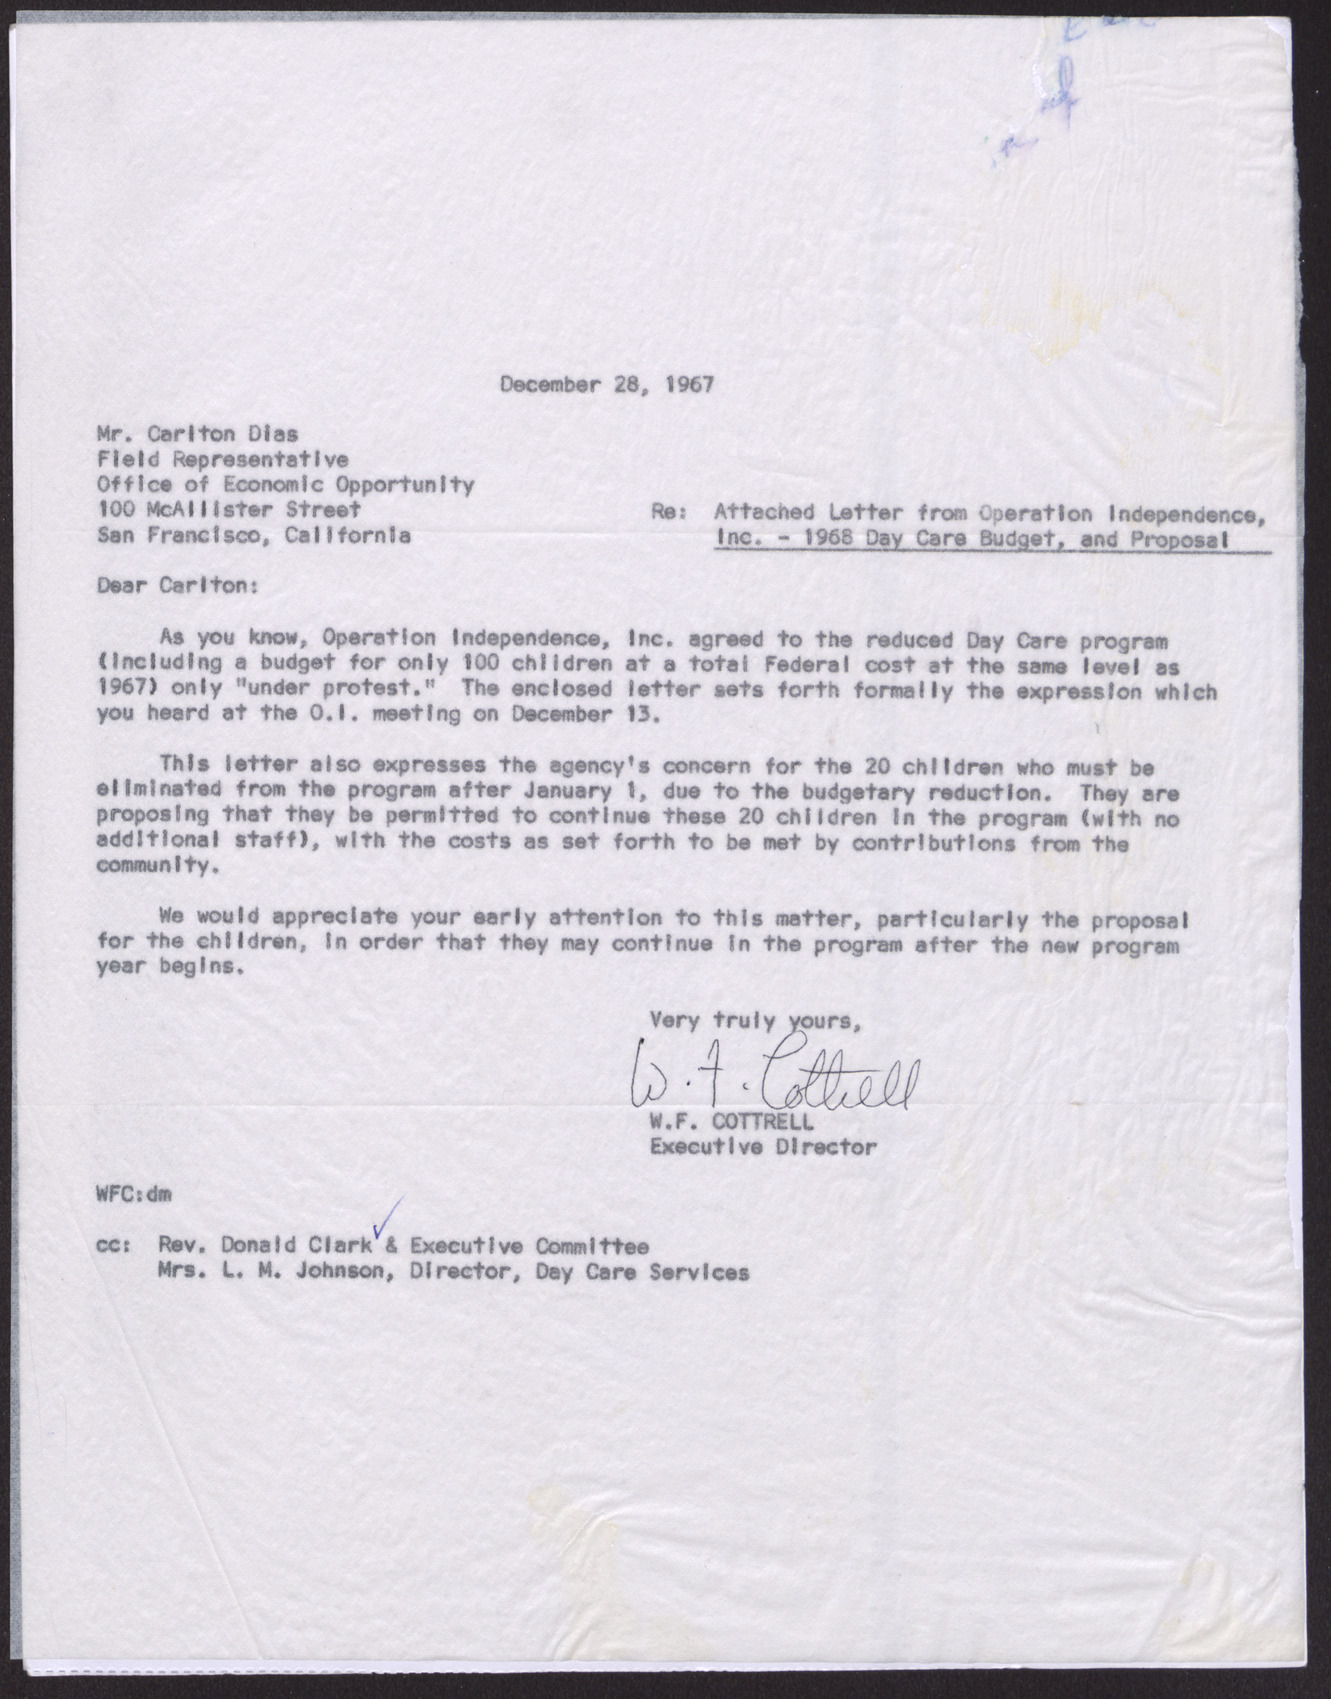 Letter to Mr. Carlton Dias from W. F. Cottrell, December 28, 1967